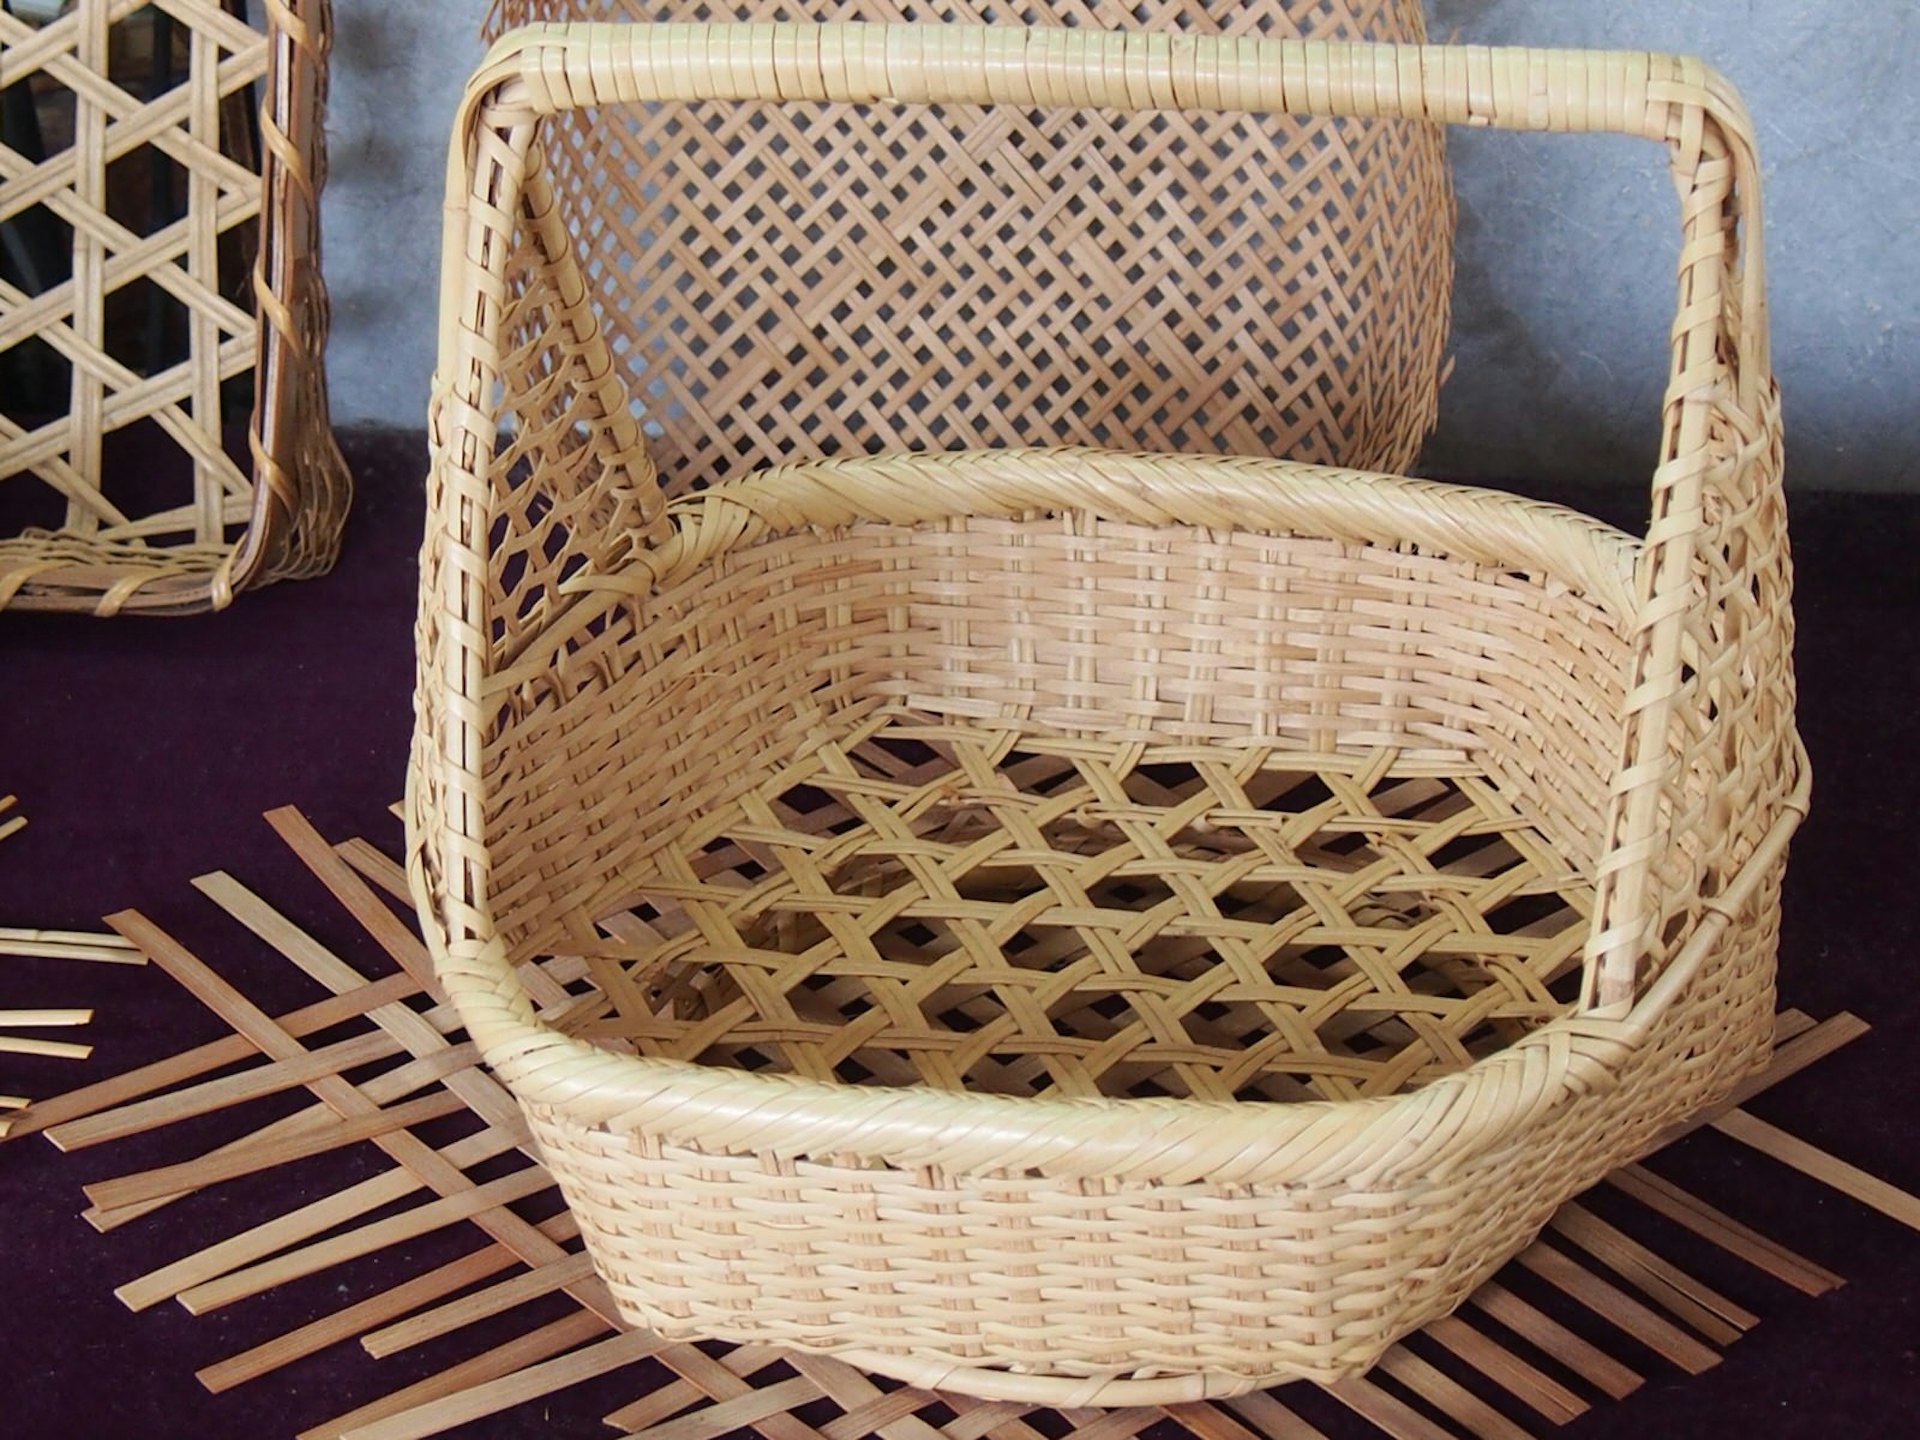 A complete handwoven bamboo basket on display © Manami Okazaki / Lonely Planet